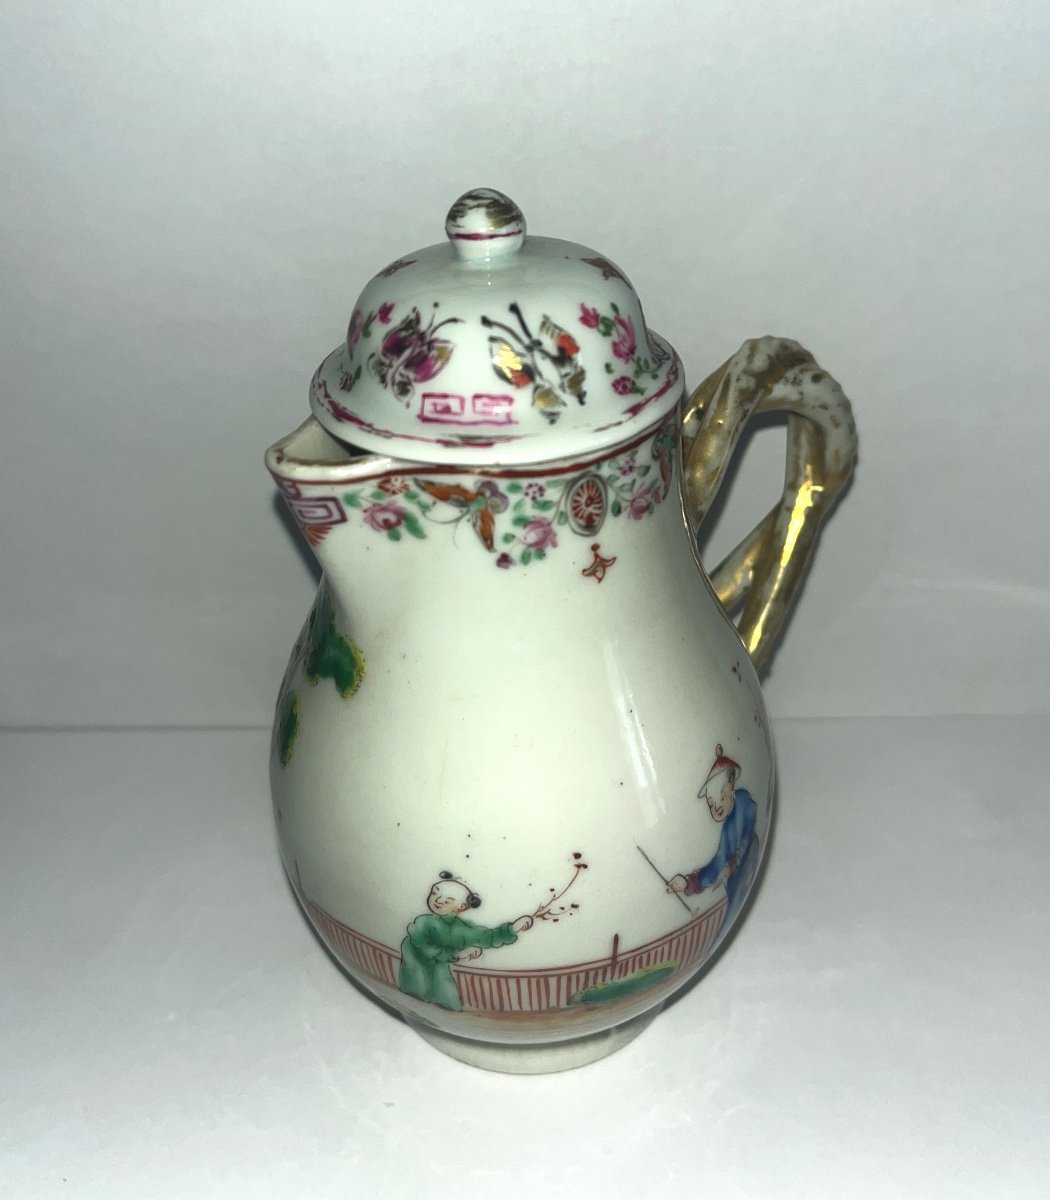 Creamer Compagnie Des Indes  With Chinese Decor From The End Of 17th Century, Beginning Of The 18th Century-photo-6